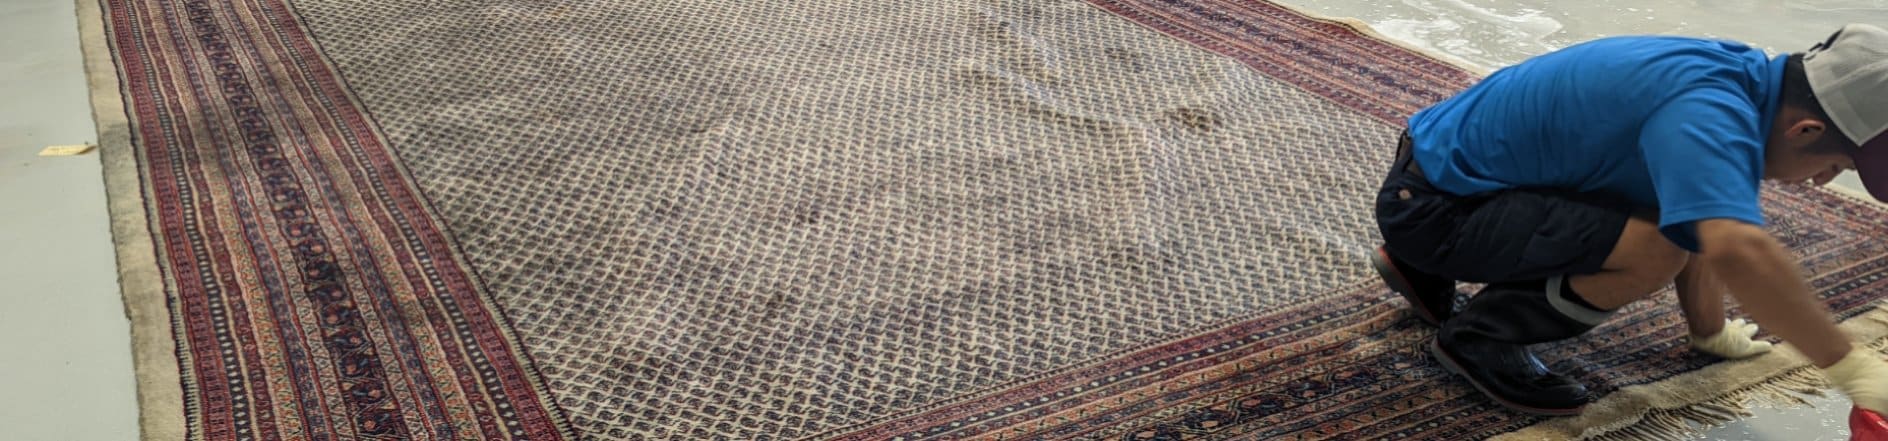 Preserving Your Prized Possessions: A Guide to Full-Service Rug Care